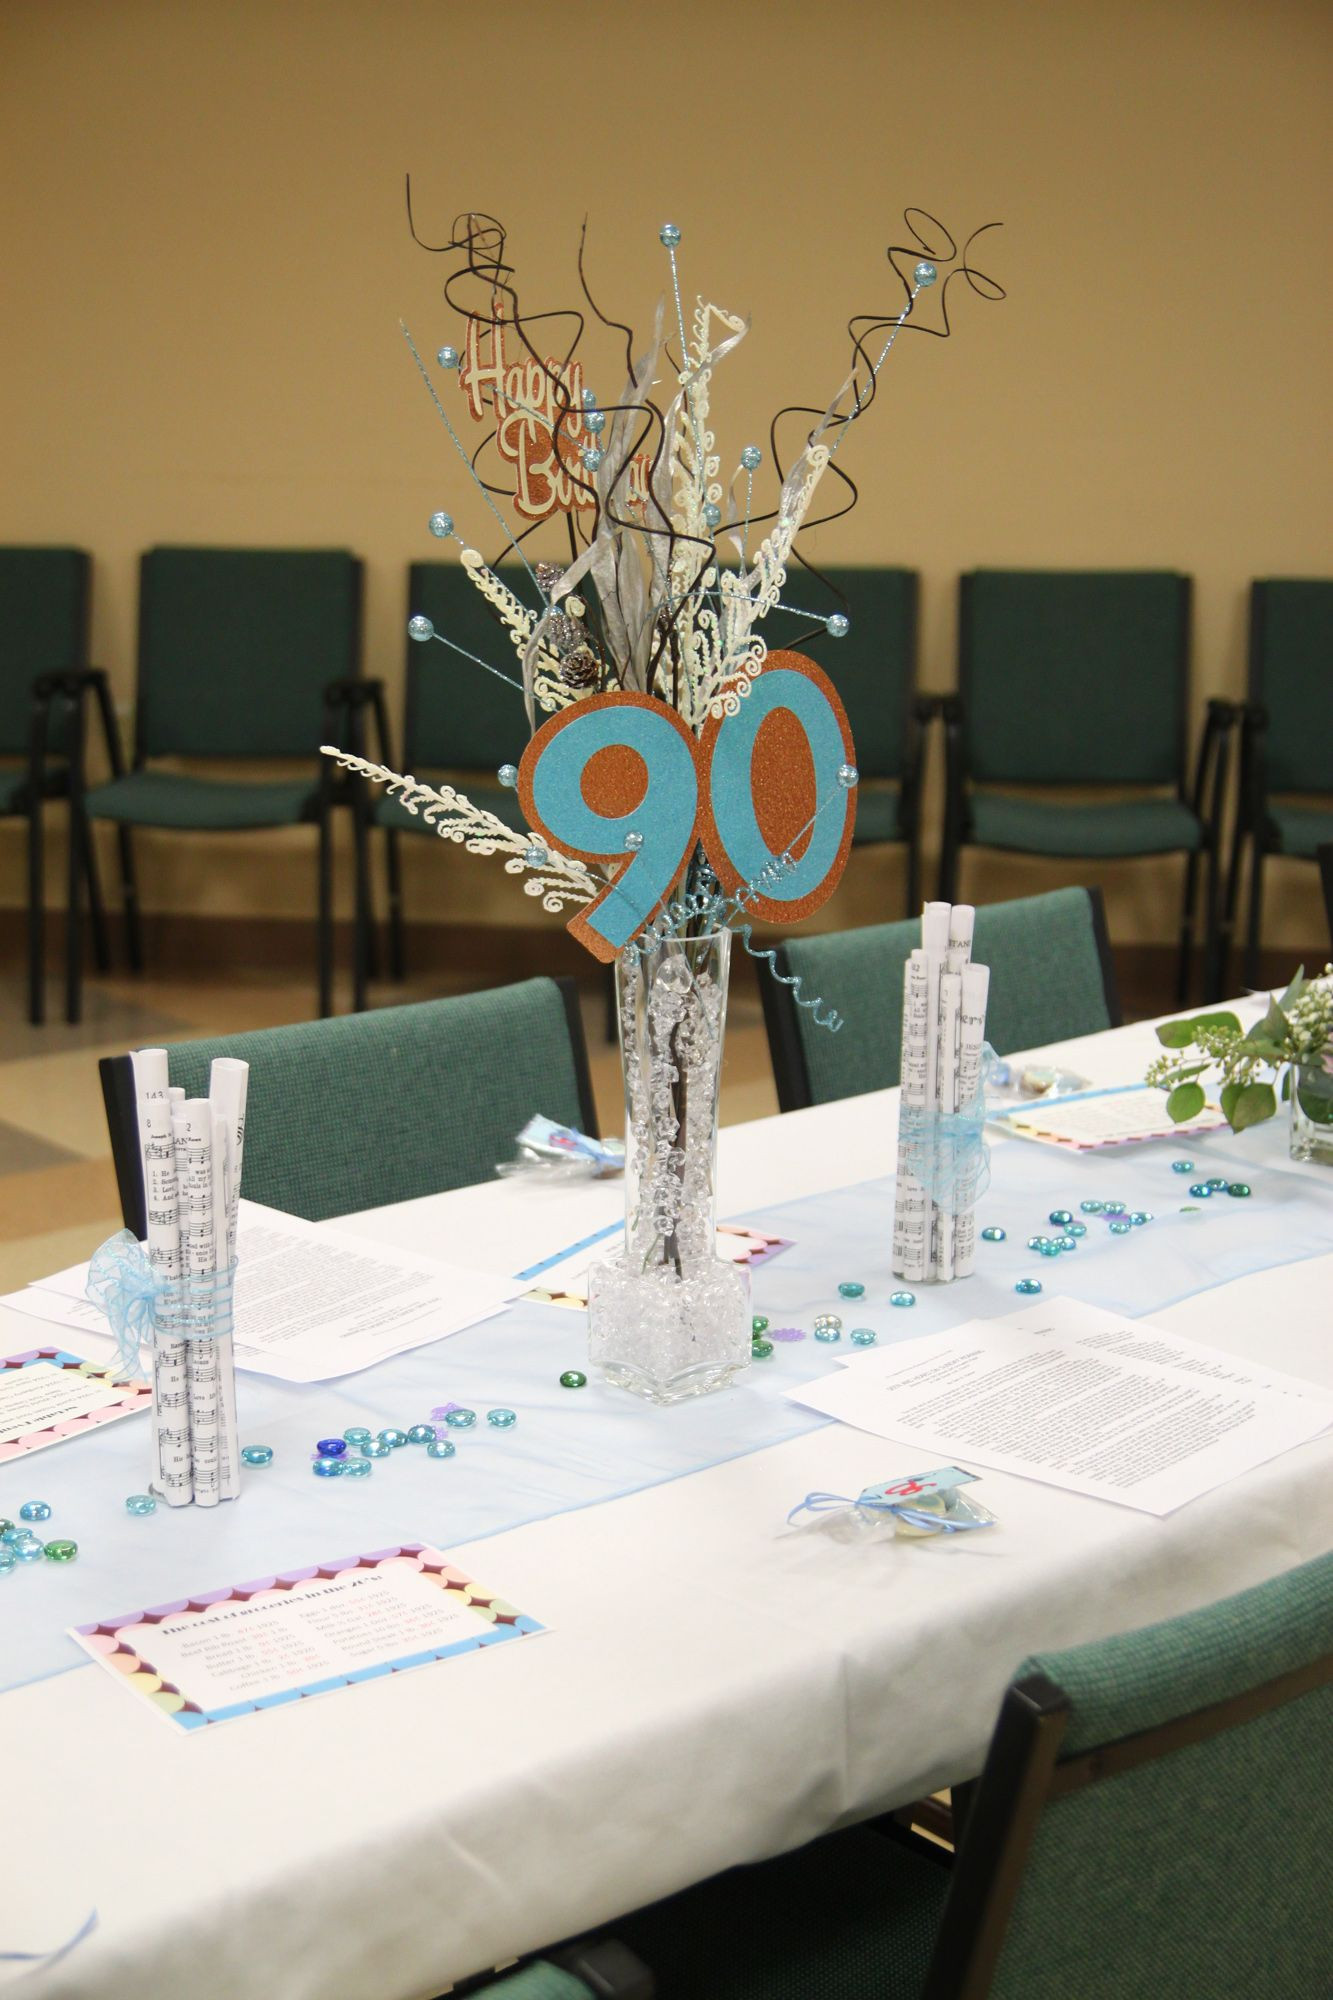 90 Birthday Decorations
 Centerpieces for Mom s 90th birthday